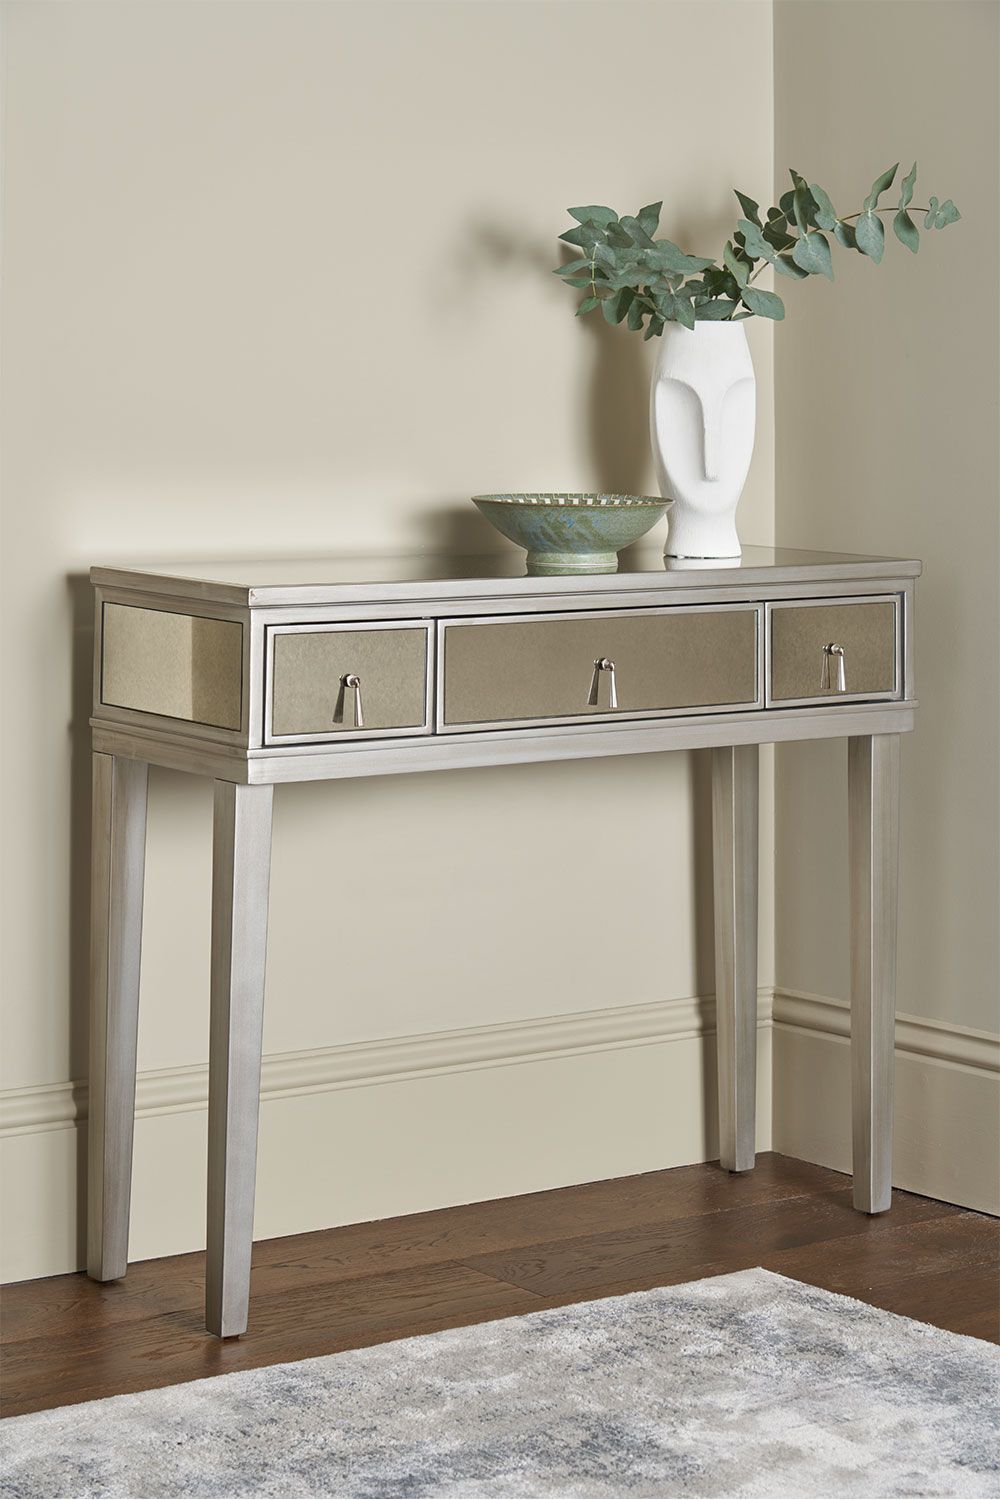 Gatsby Mirrored Console Table | Feather & Black Inside Metallic Silver Console Tables (View 3 of 20)